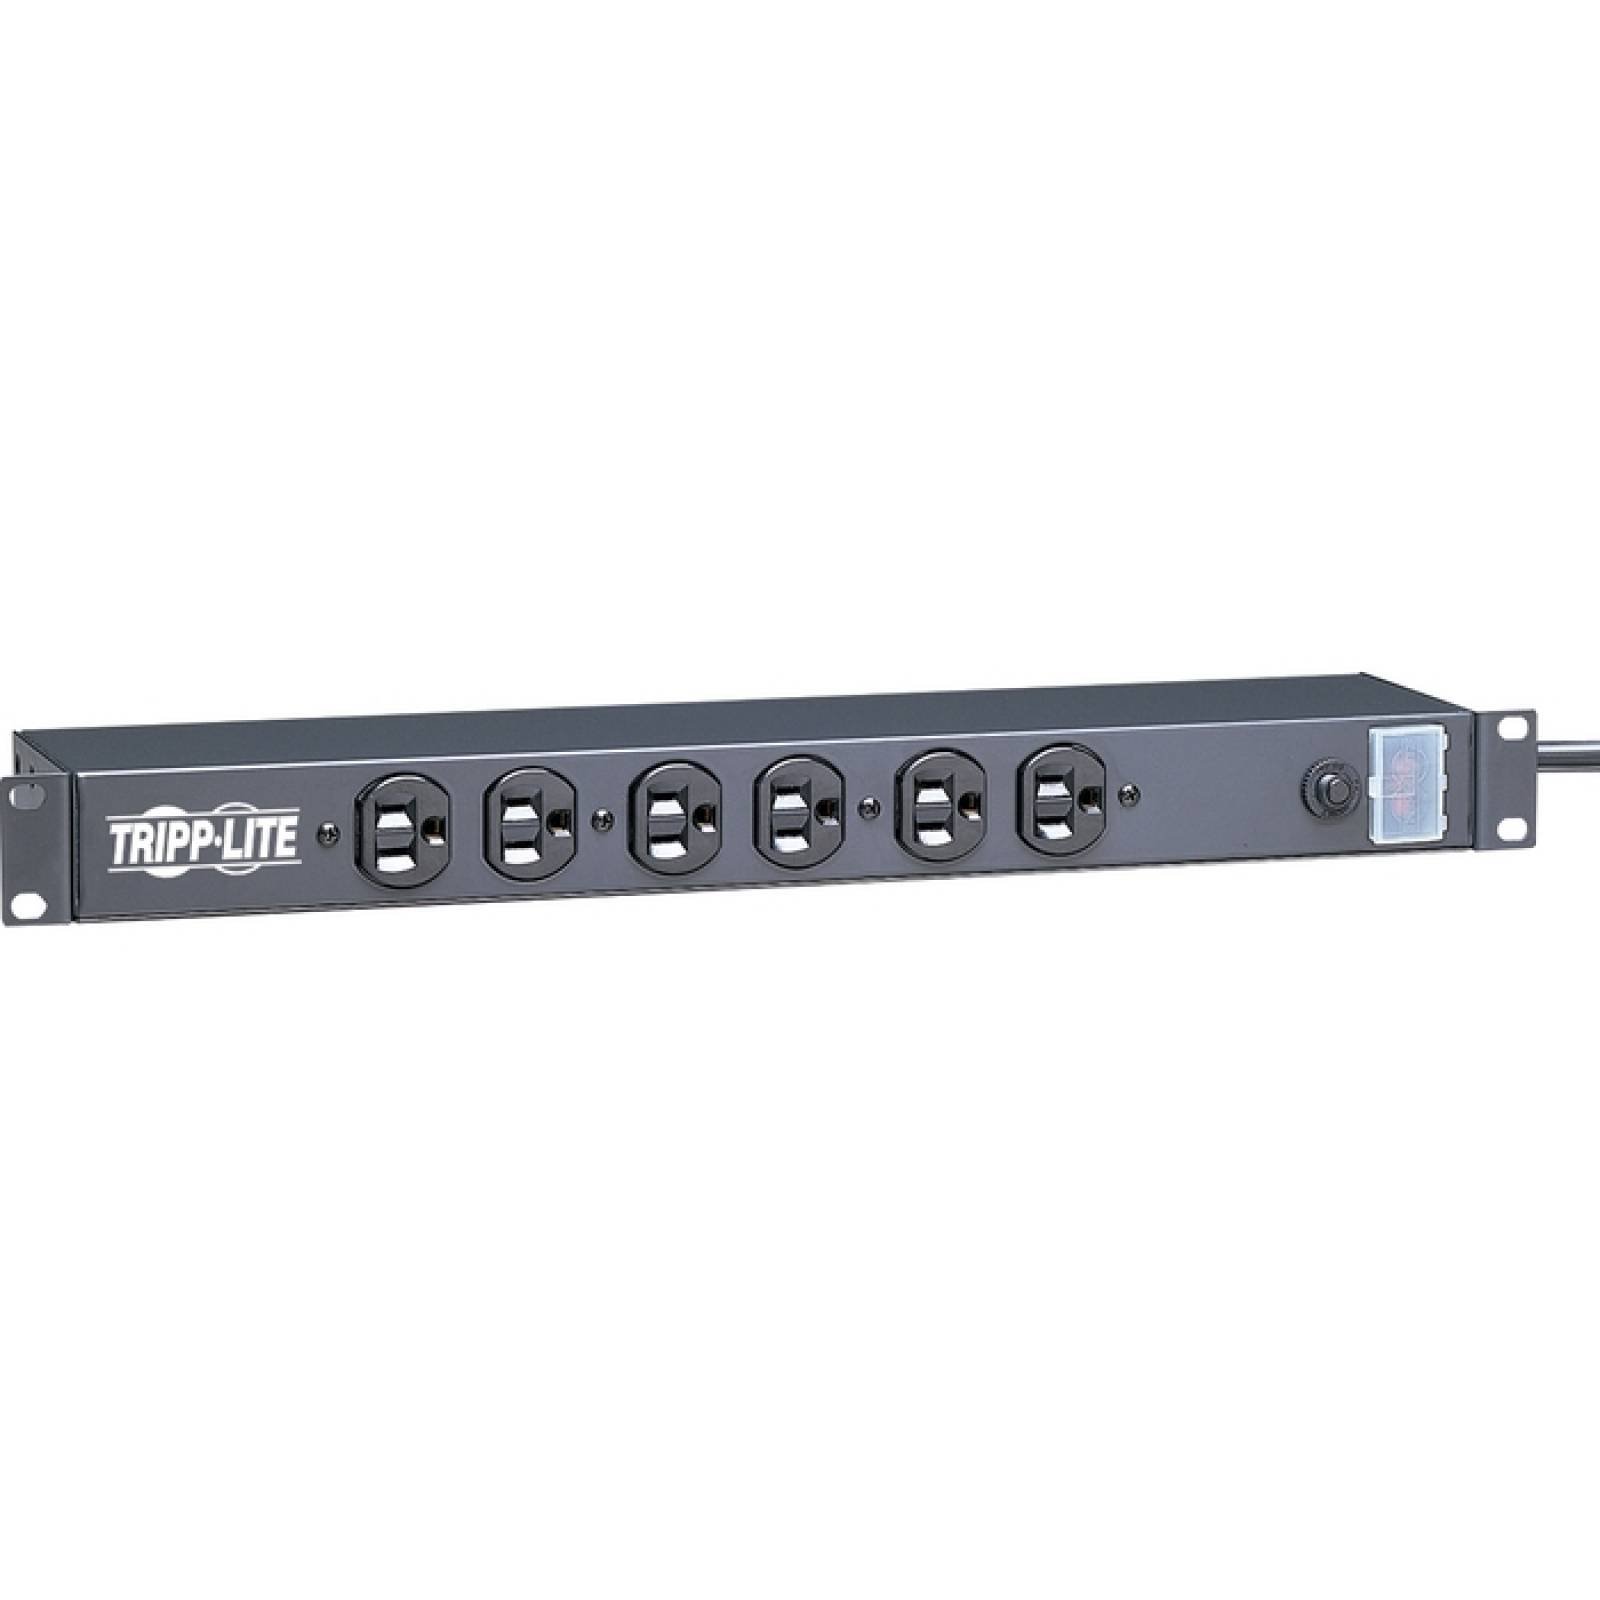 Tripp Lite Surge Protector Rackmount 14 Outlet 15 39Cord 3000 Joules 1U RM